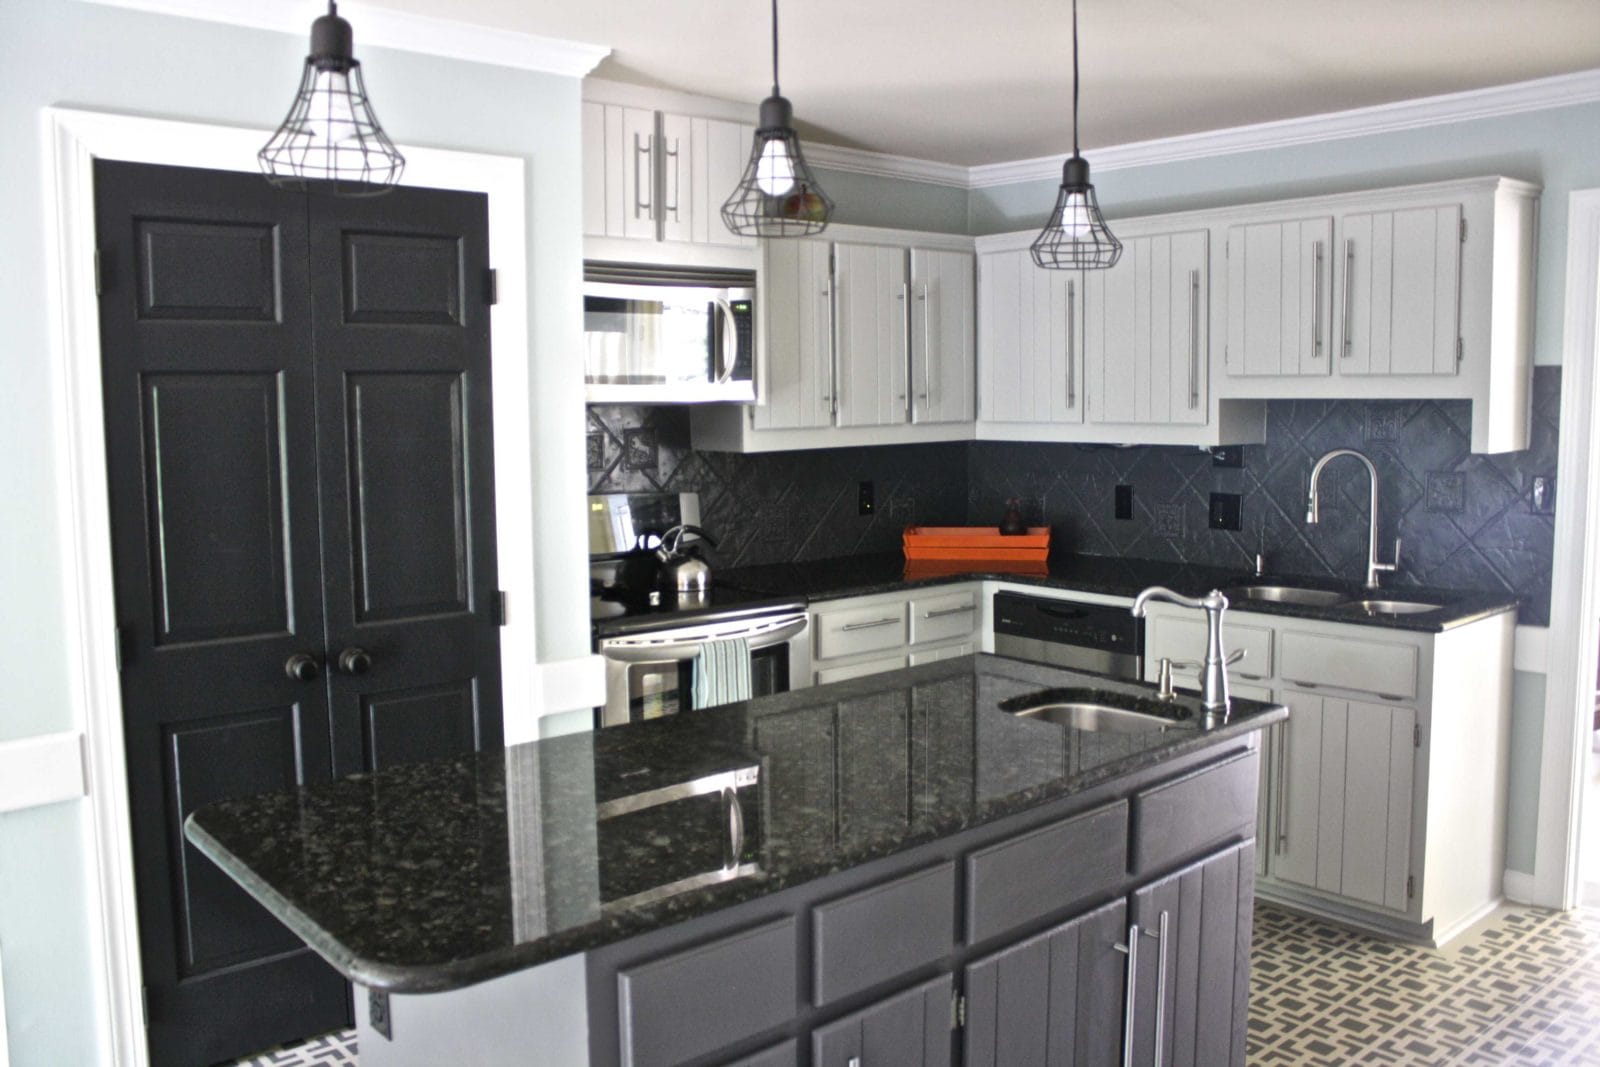 WOW! Budget kitchen remodel by Designer Trapped in a Lawyer's Body. Totally transformed with PAINT! #kitchenremodel